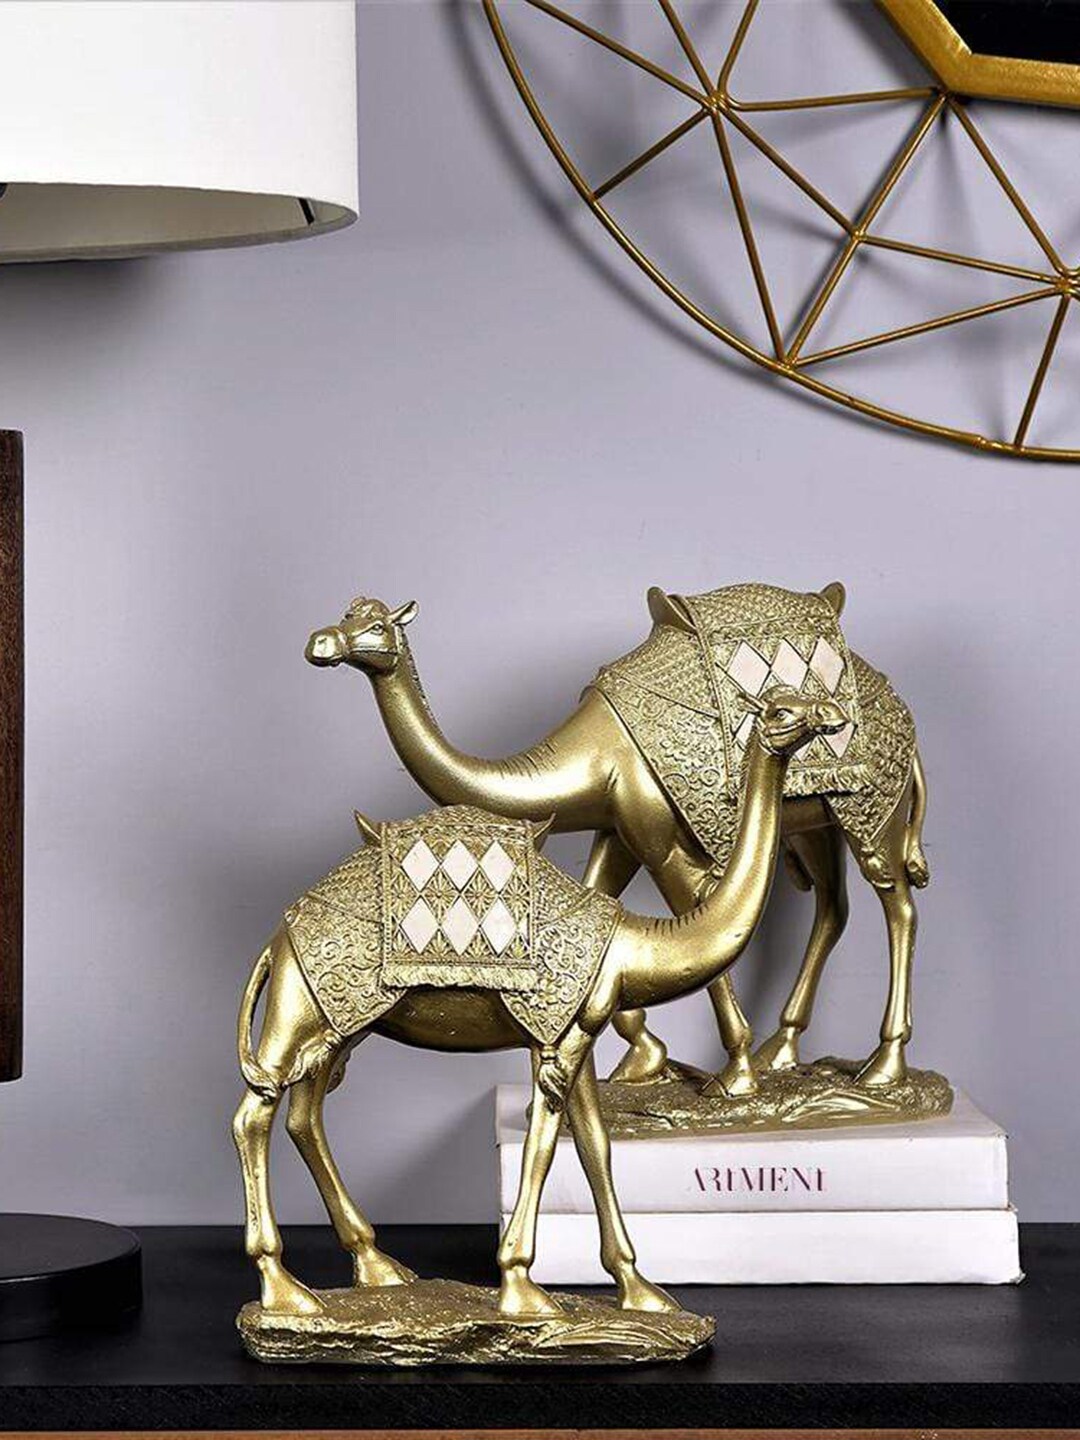 THE ARTMENT Set Of 2 Gold-Toned Rustic Camel Showpiece Price in India